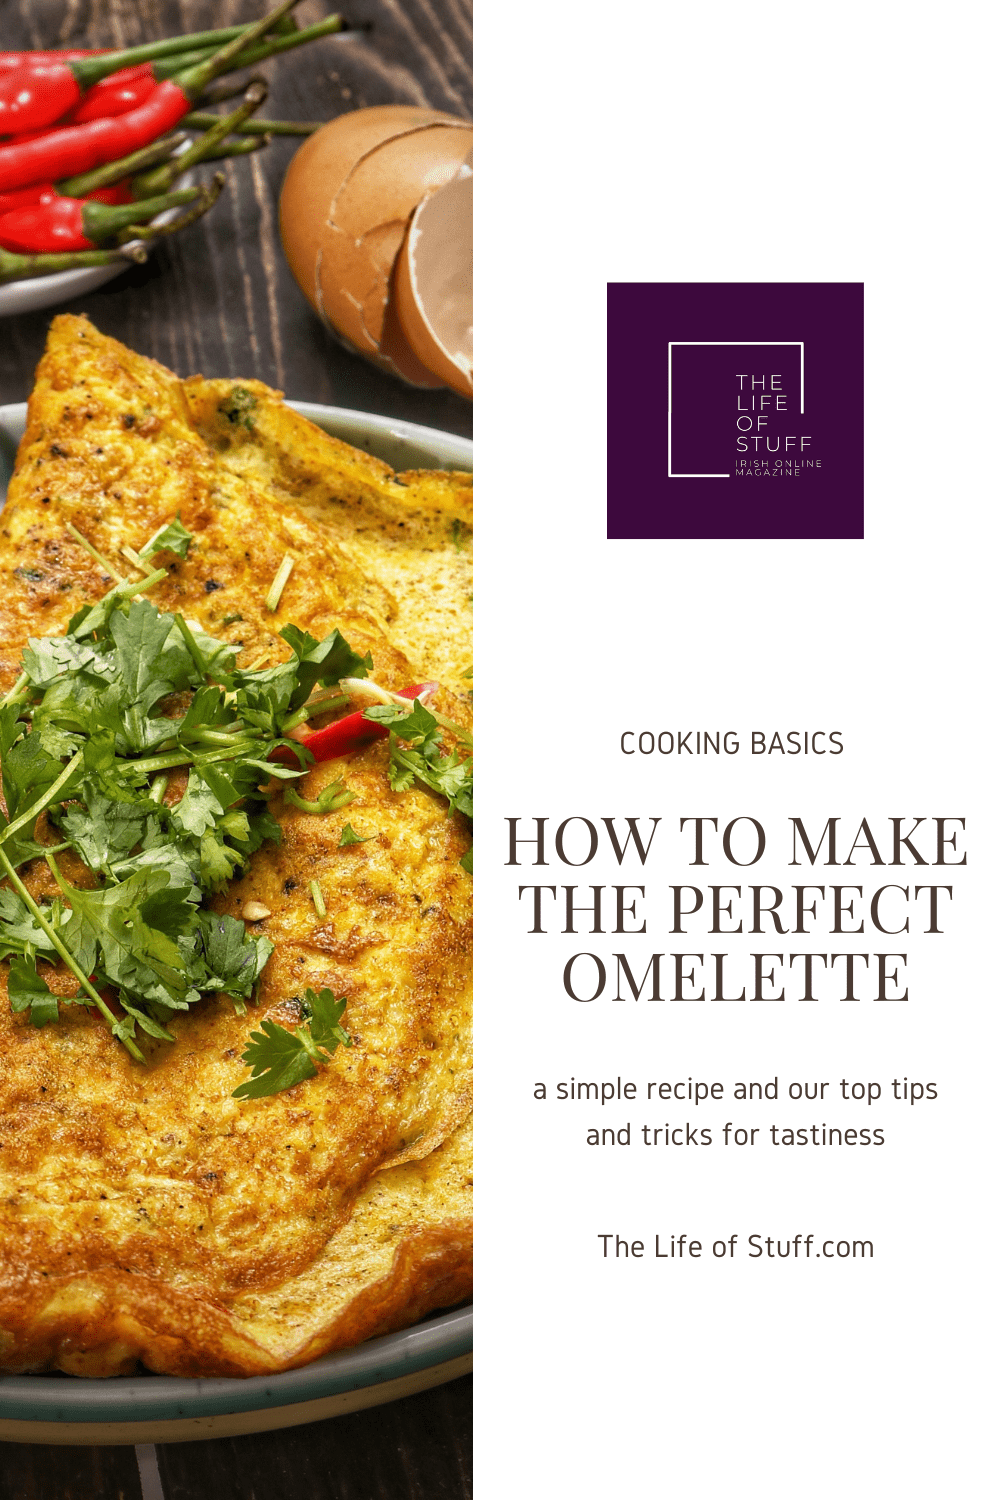 Cooking Basics - How to Make the Perfect Omelette - The Life of Stuff